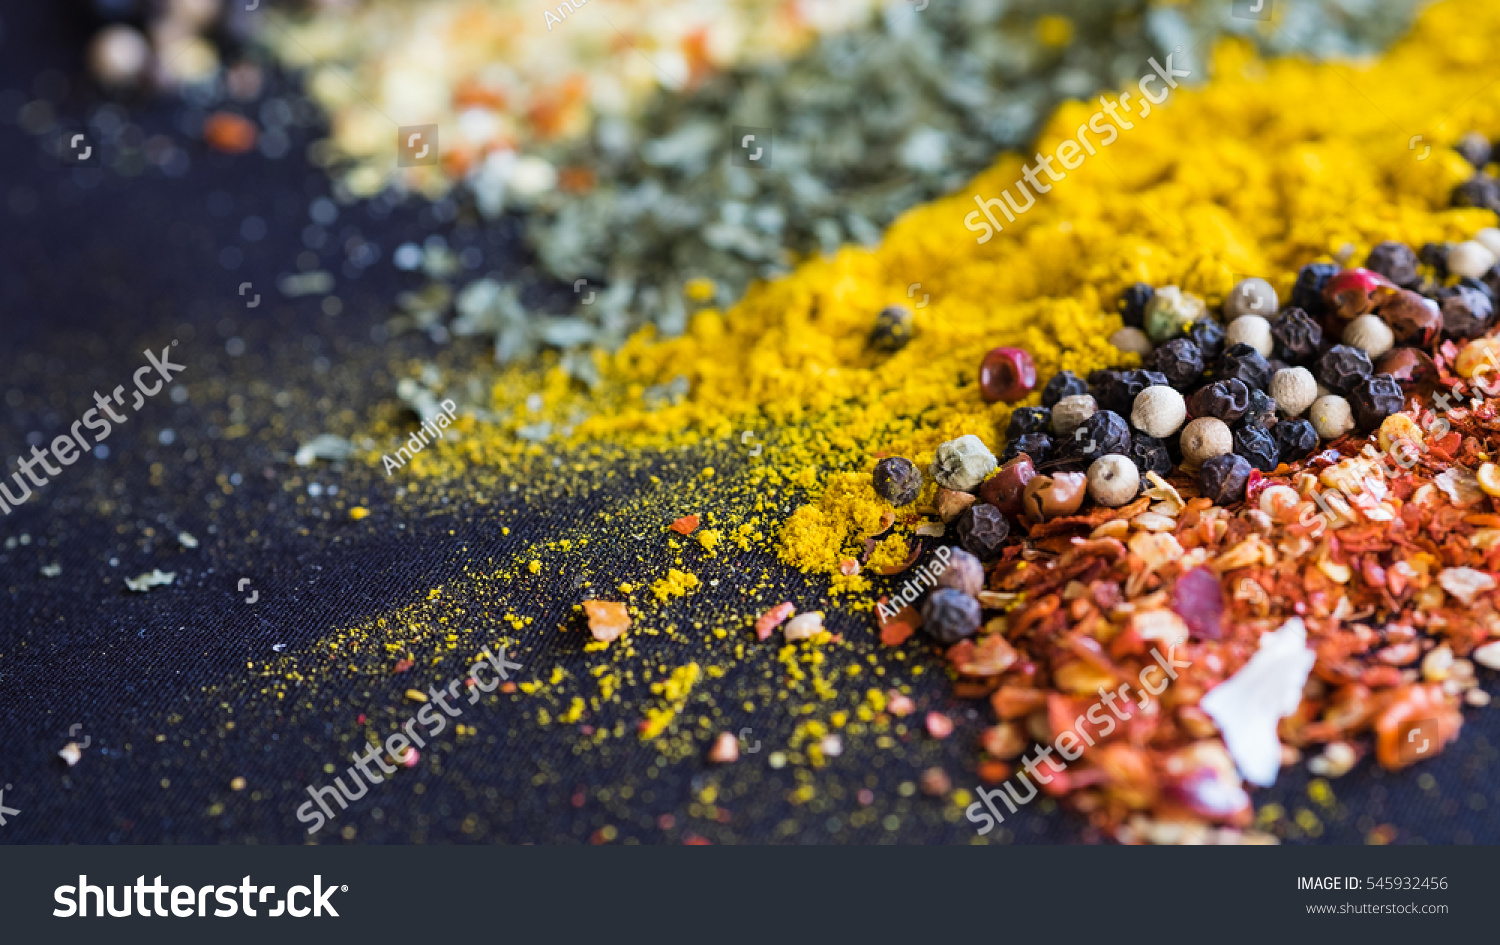 Spices and herbs on a black background #545932456